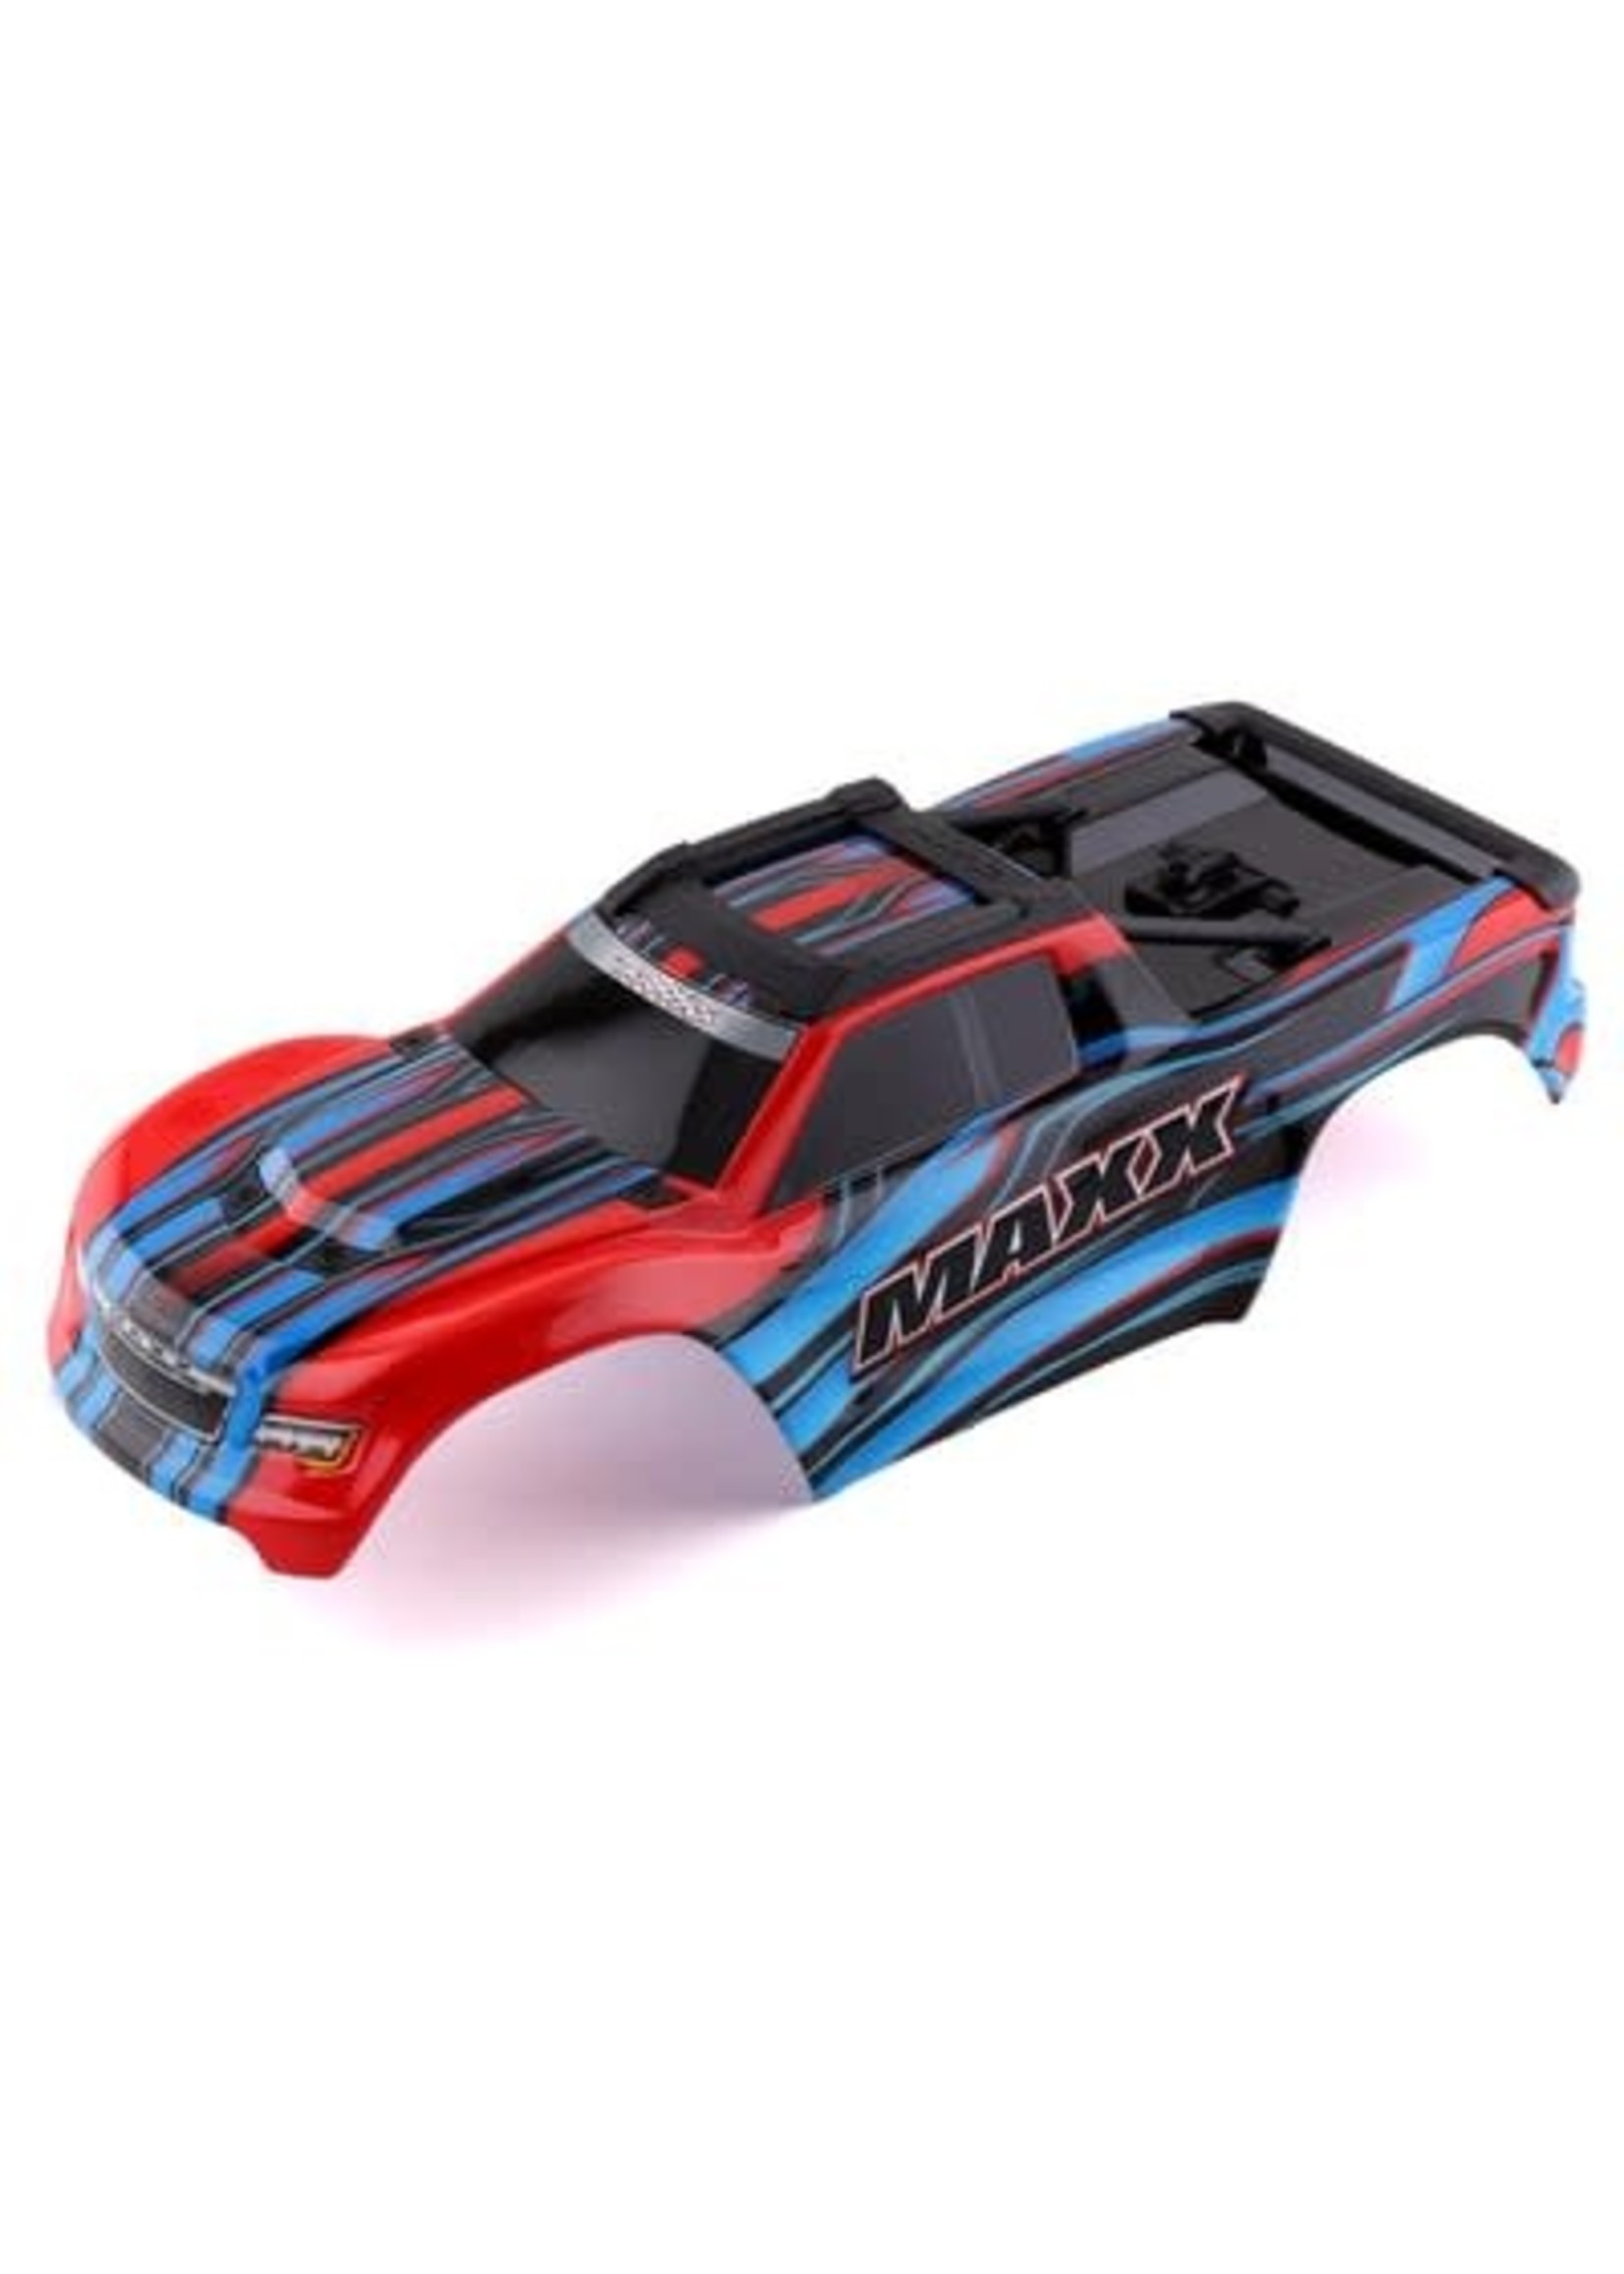 Traxxas 8911P Body, Maxx , red-x (painted)/ decal sheet